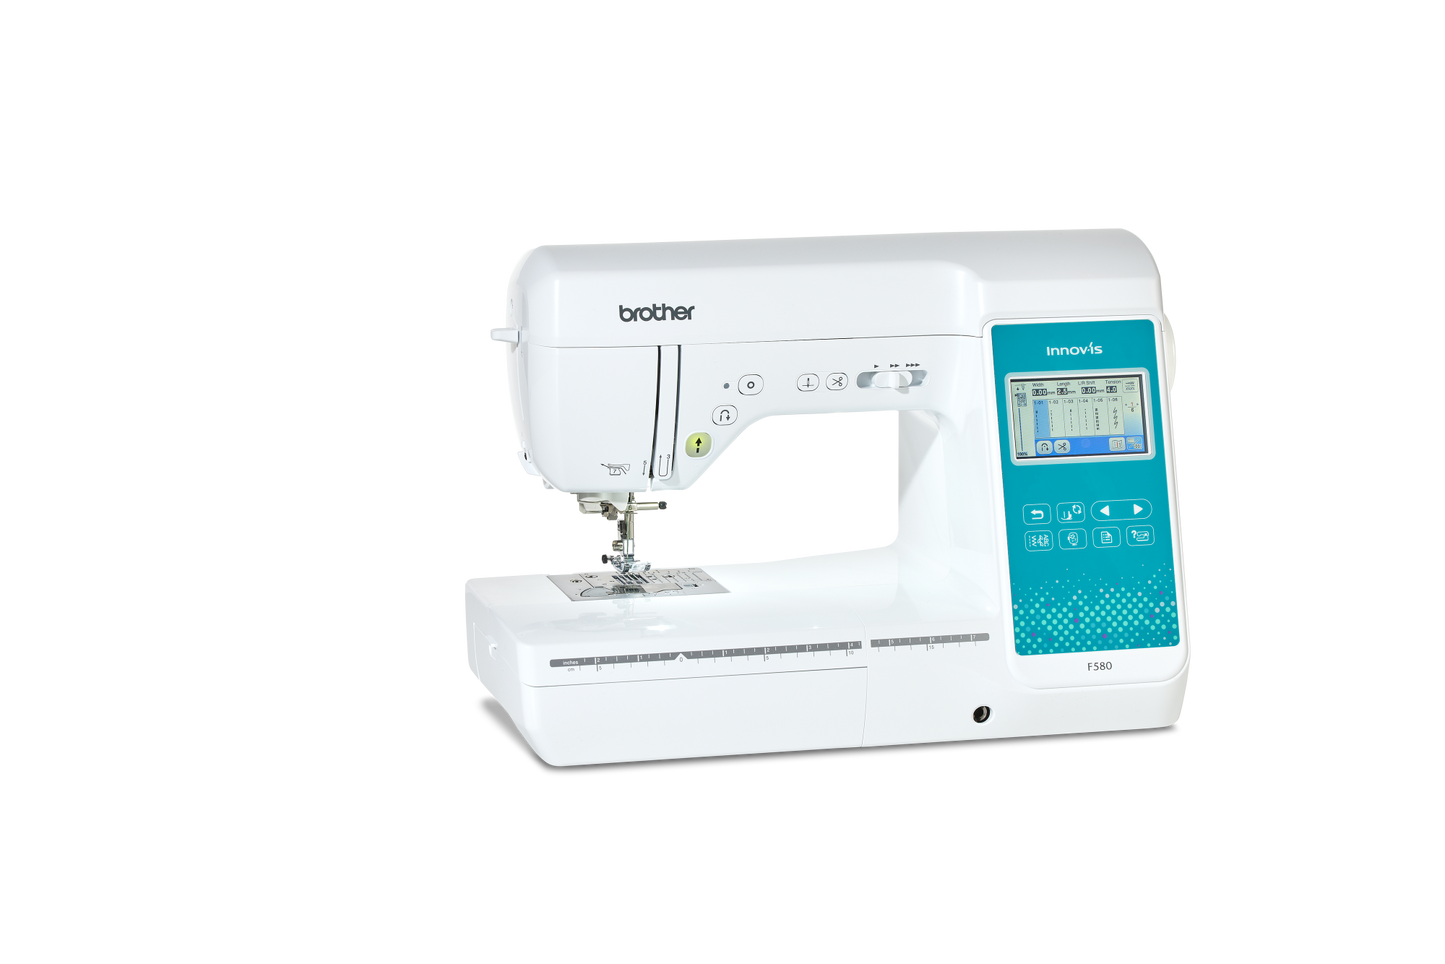 Brother Innovis F580 Sewing & Embroidery Machine